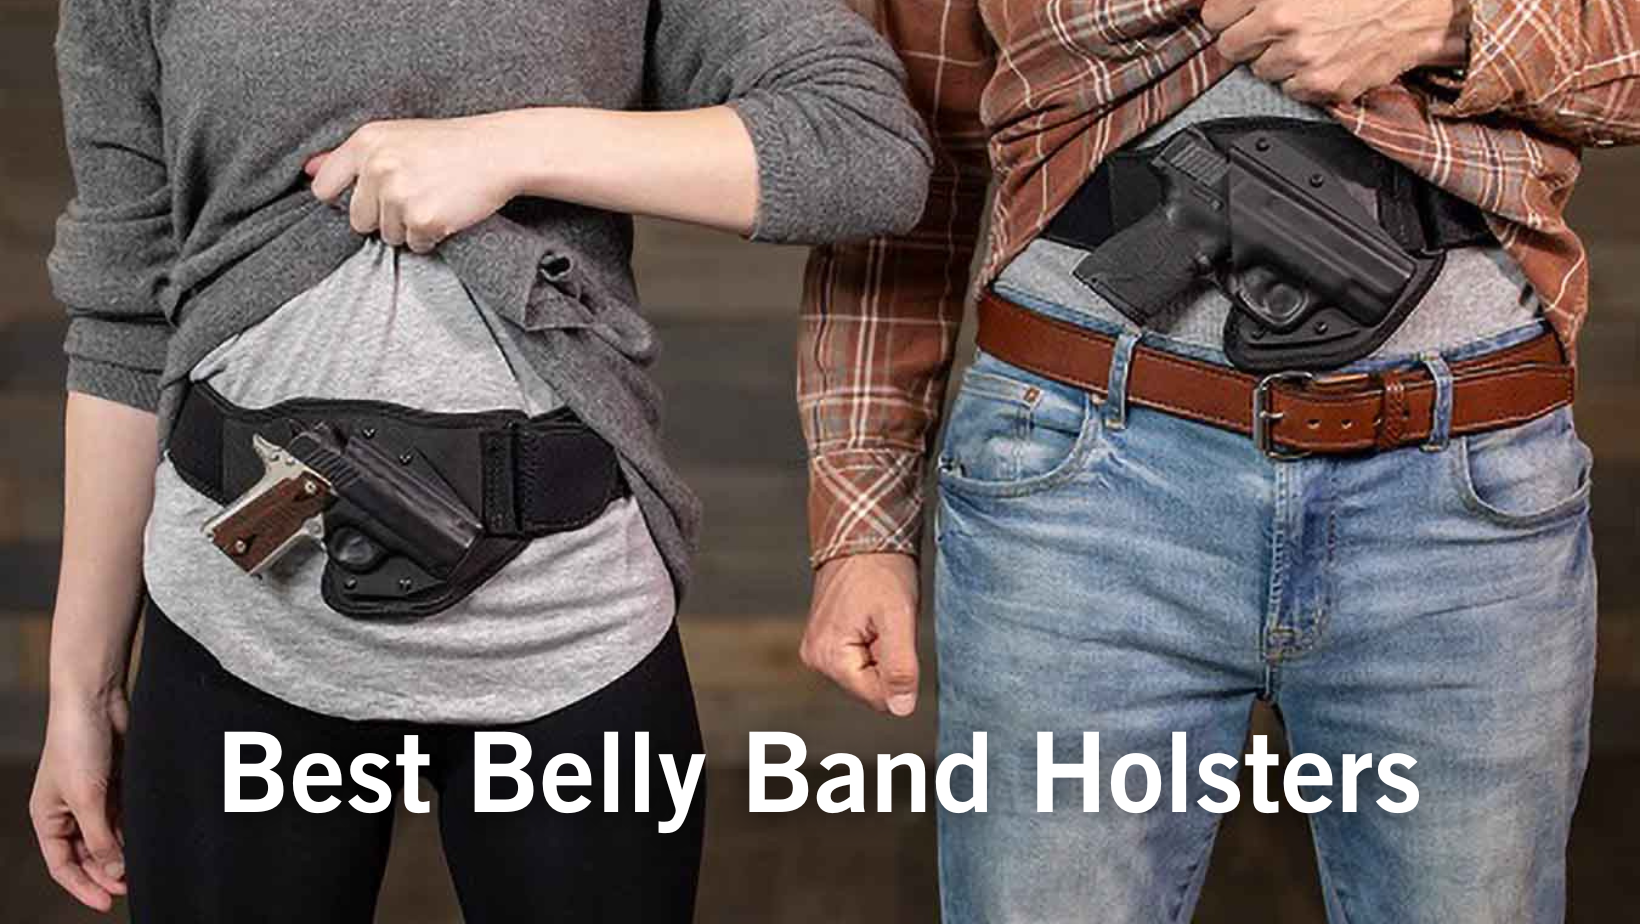 Benefits of Athletic Wear Holsters